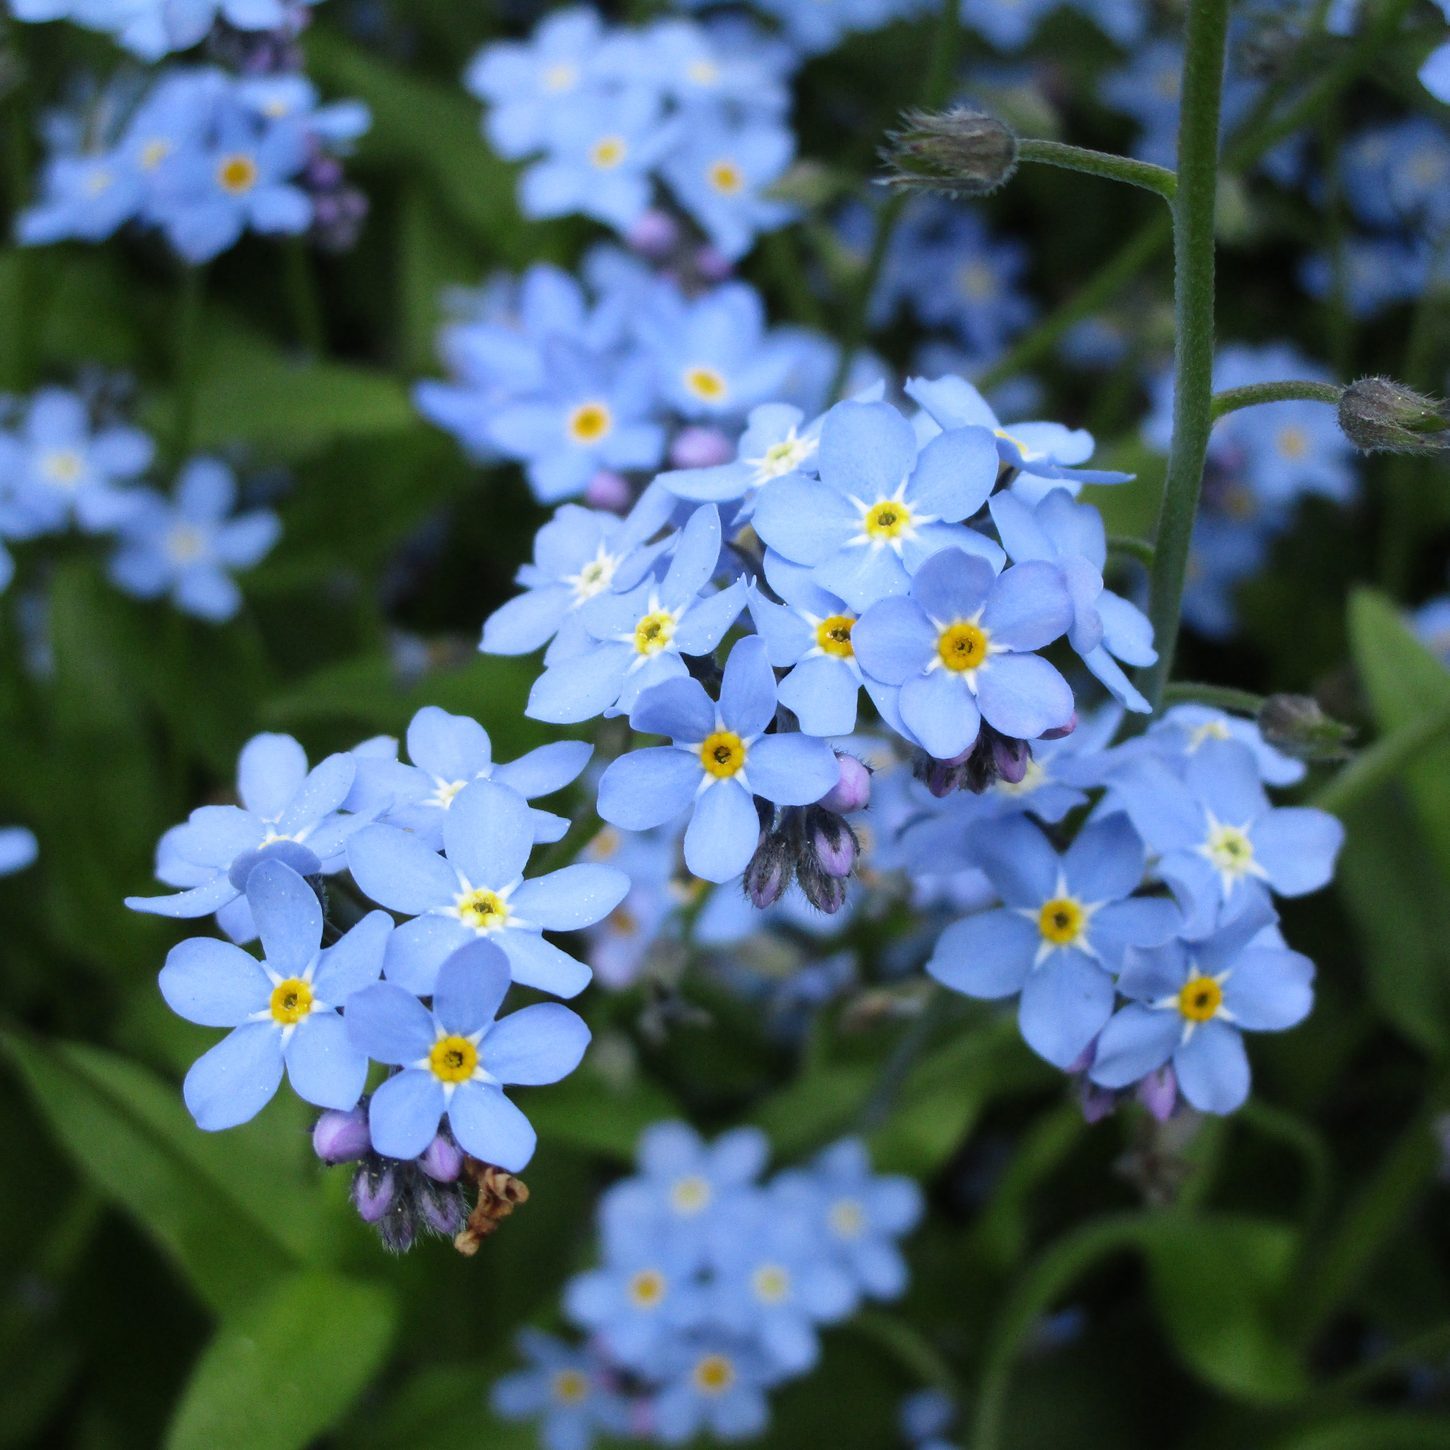 Forget-me-not - how to plant and grow myosotis, cute edge flowers